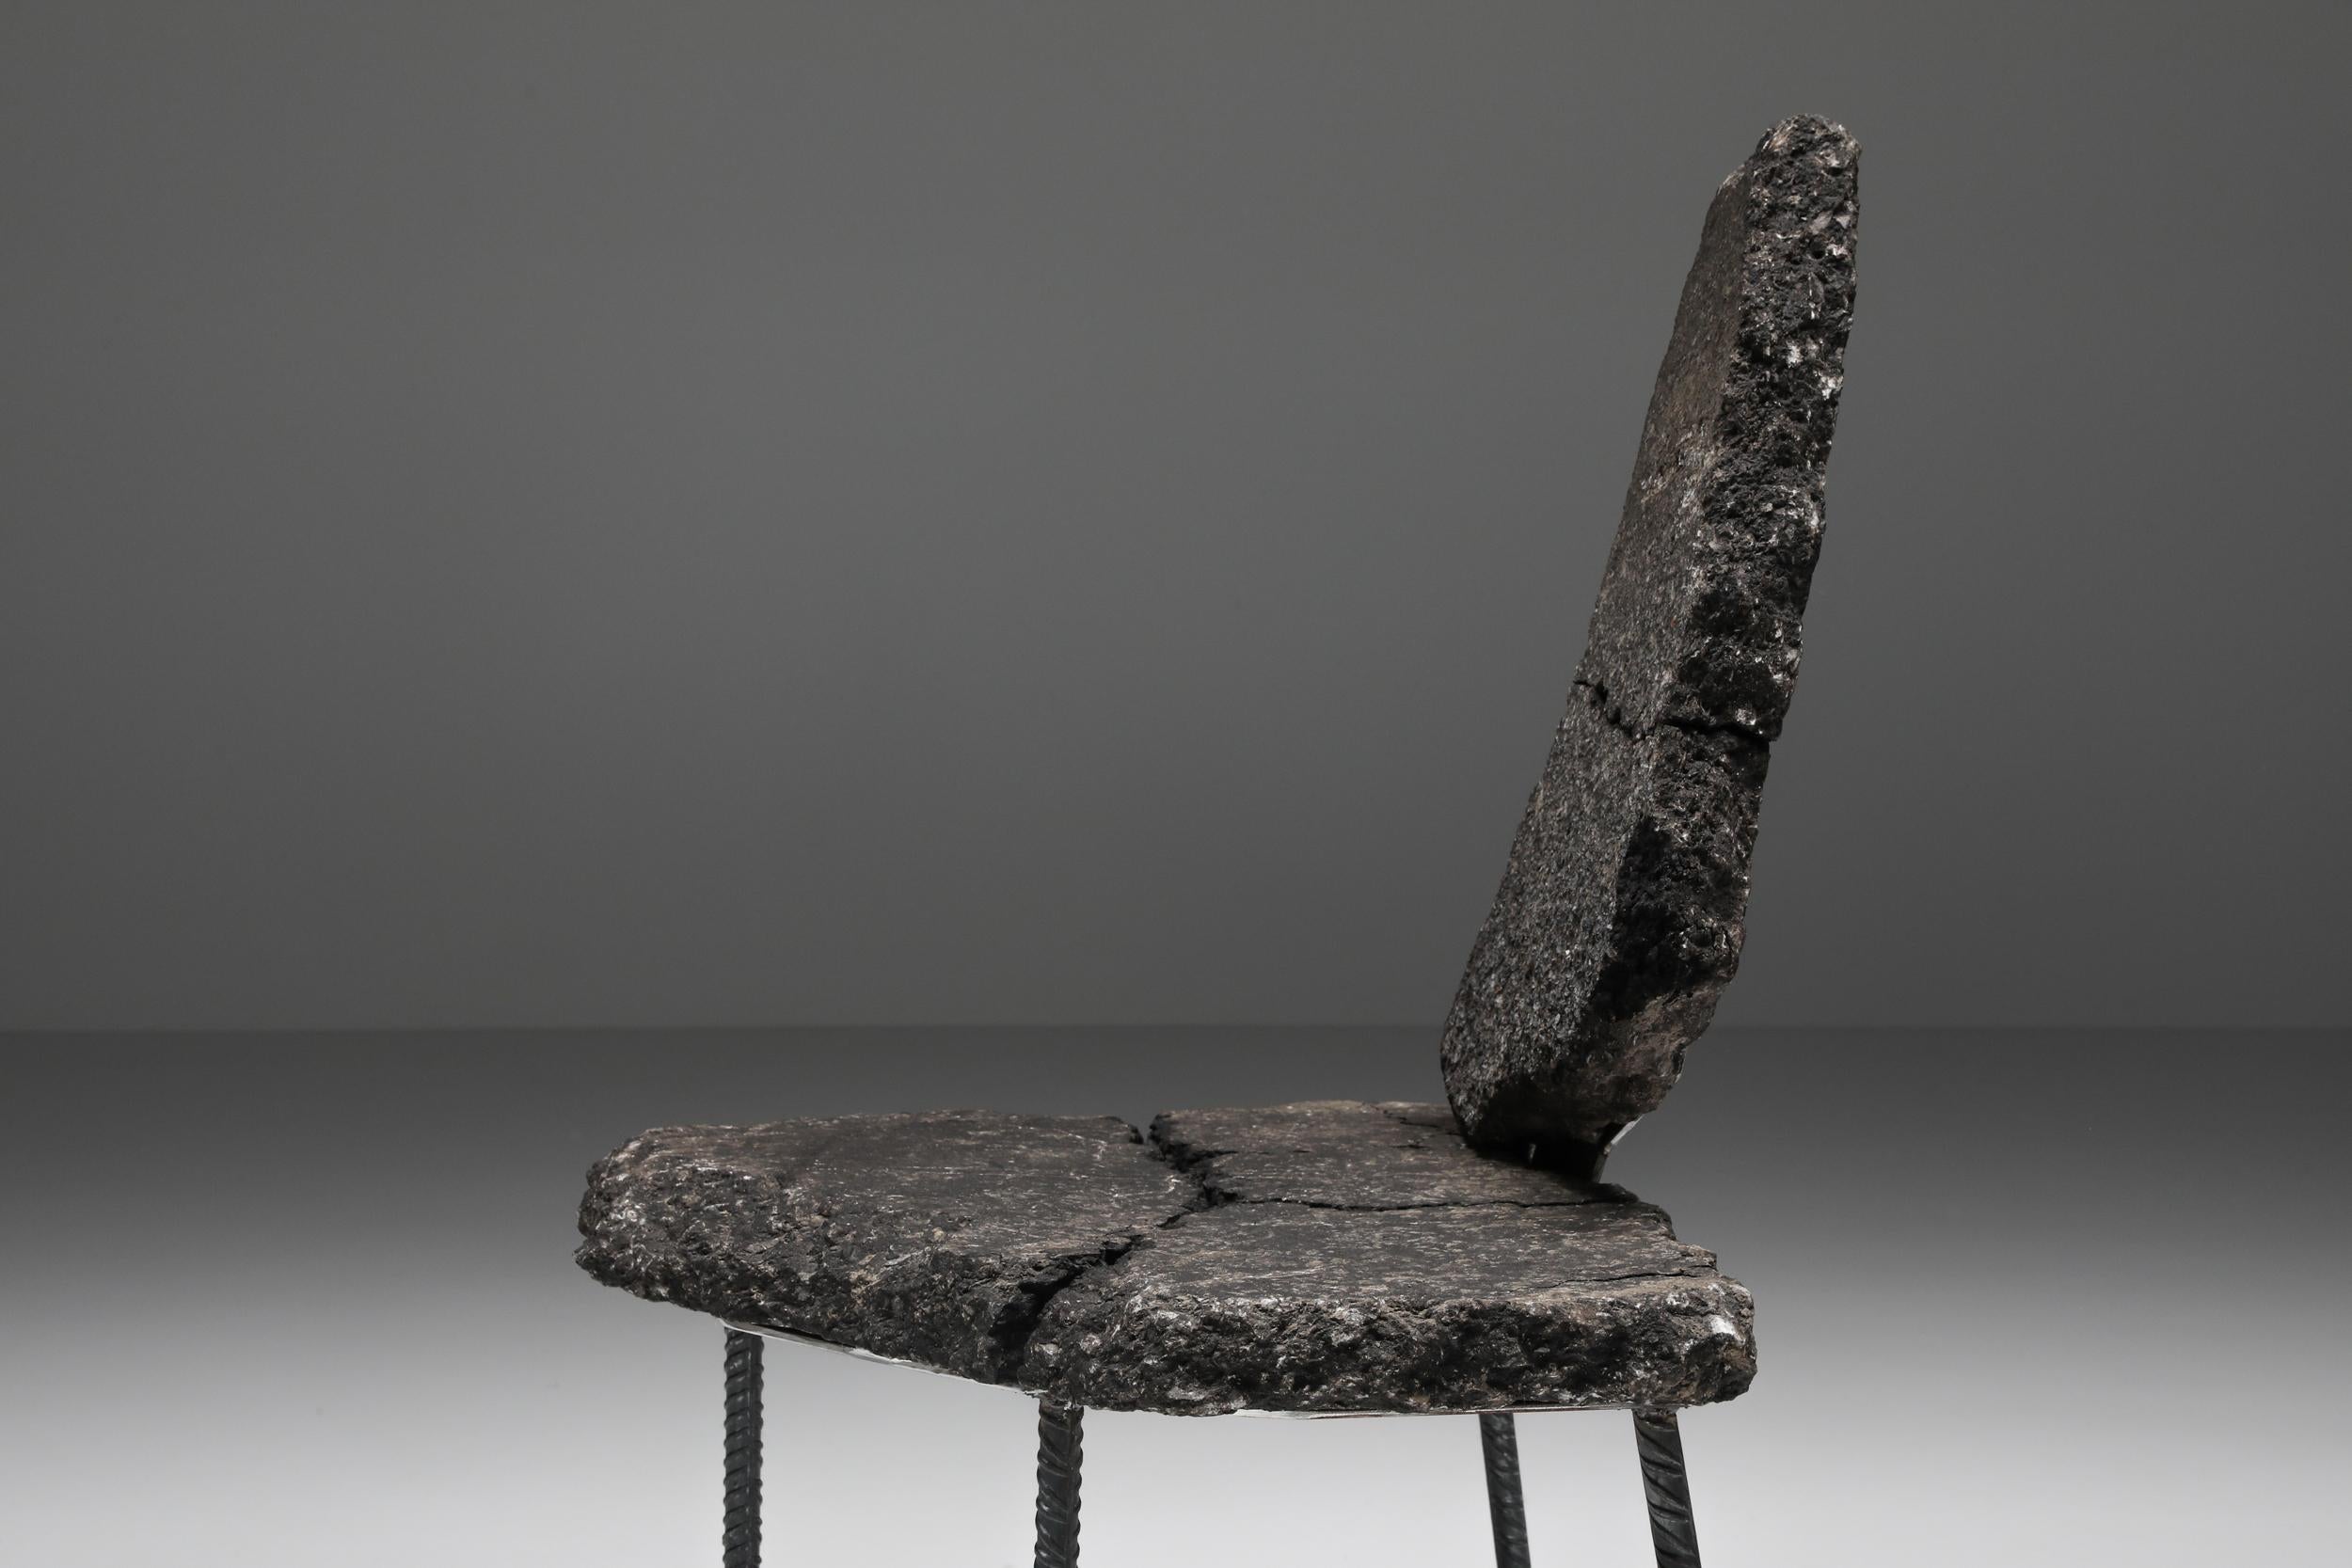 Contemporary Chair by Lionel Jadot 'Lost Highway' Belgian Art and Design Basel For Sale 1